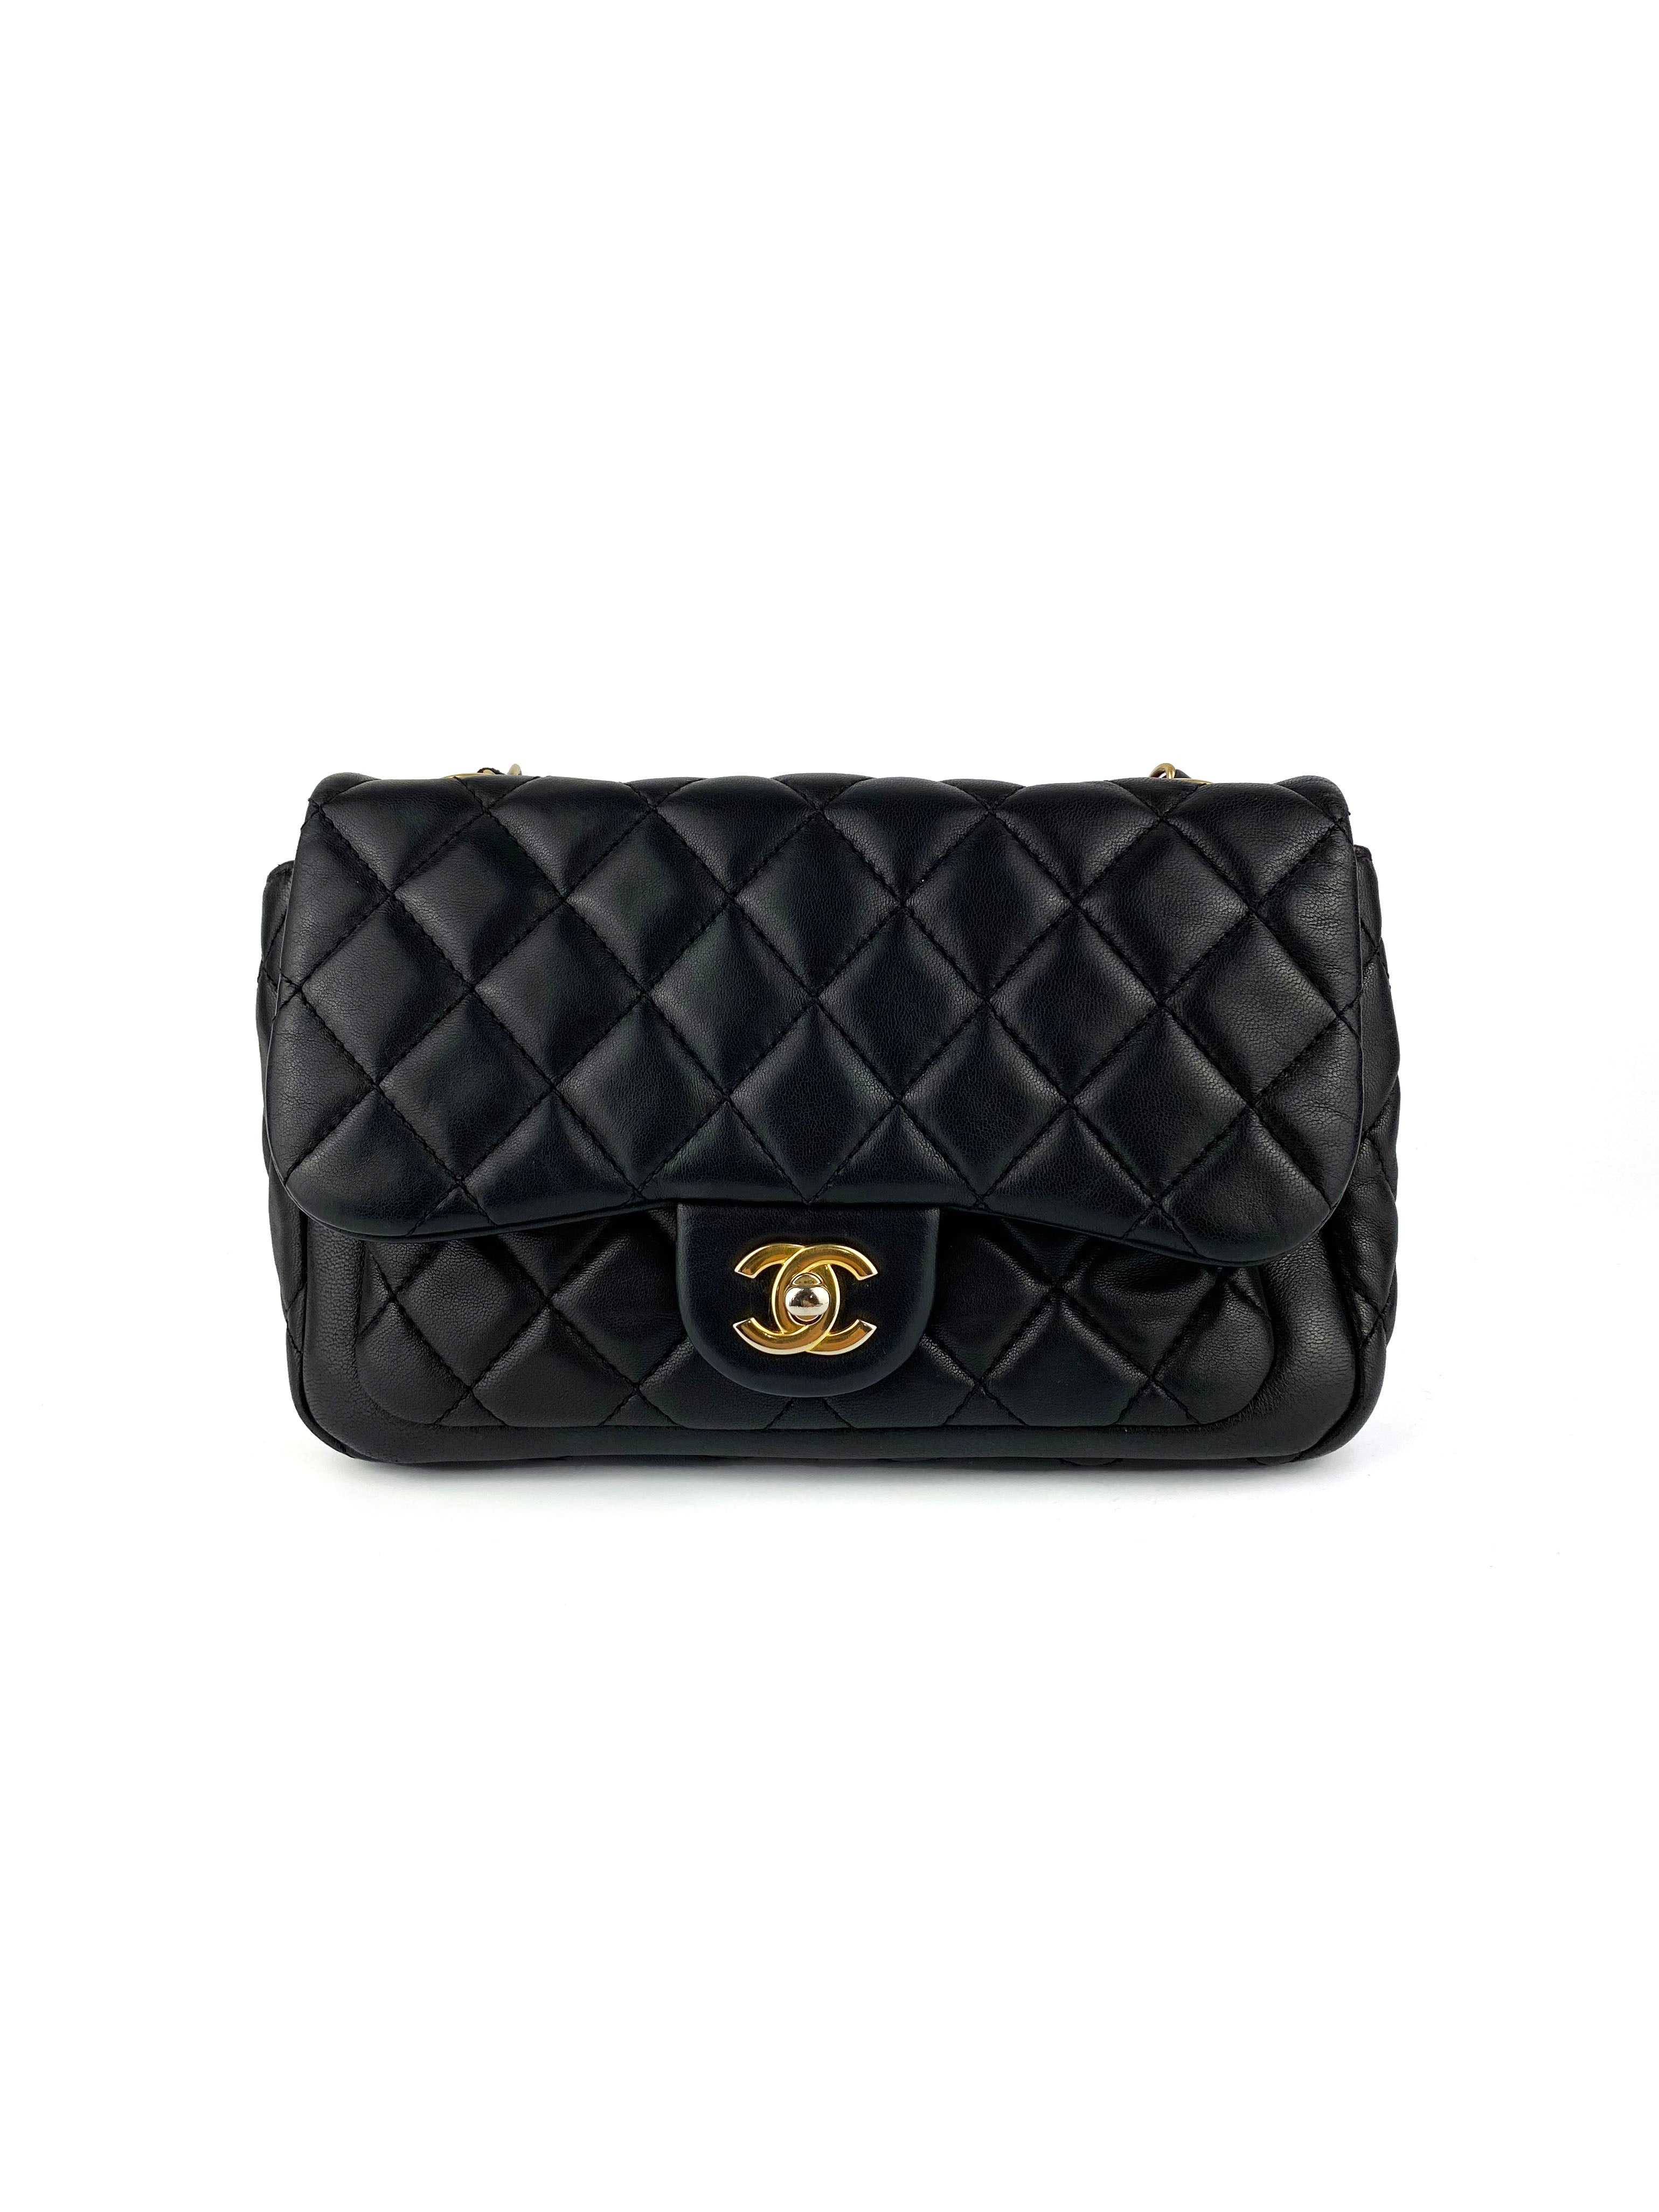 chanel-small-quilted-flap-bag-8.jpg